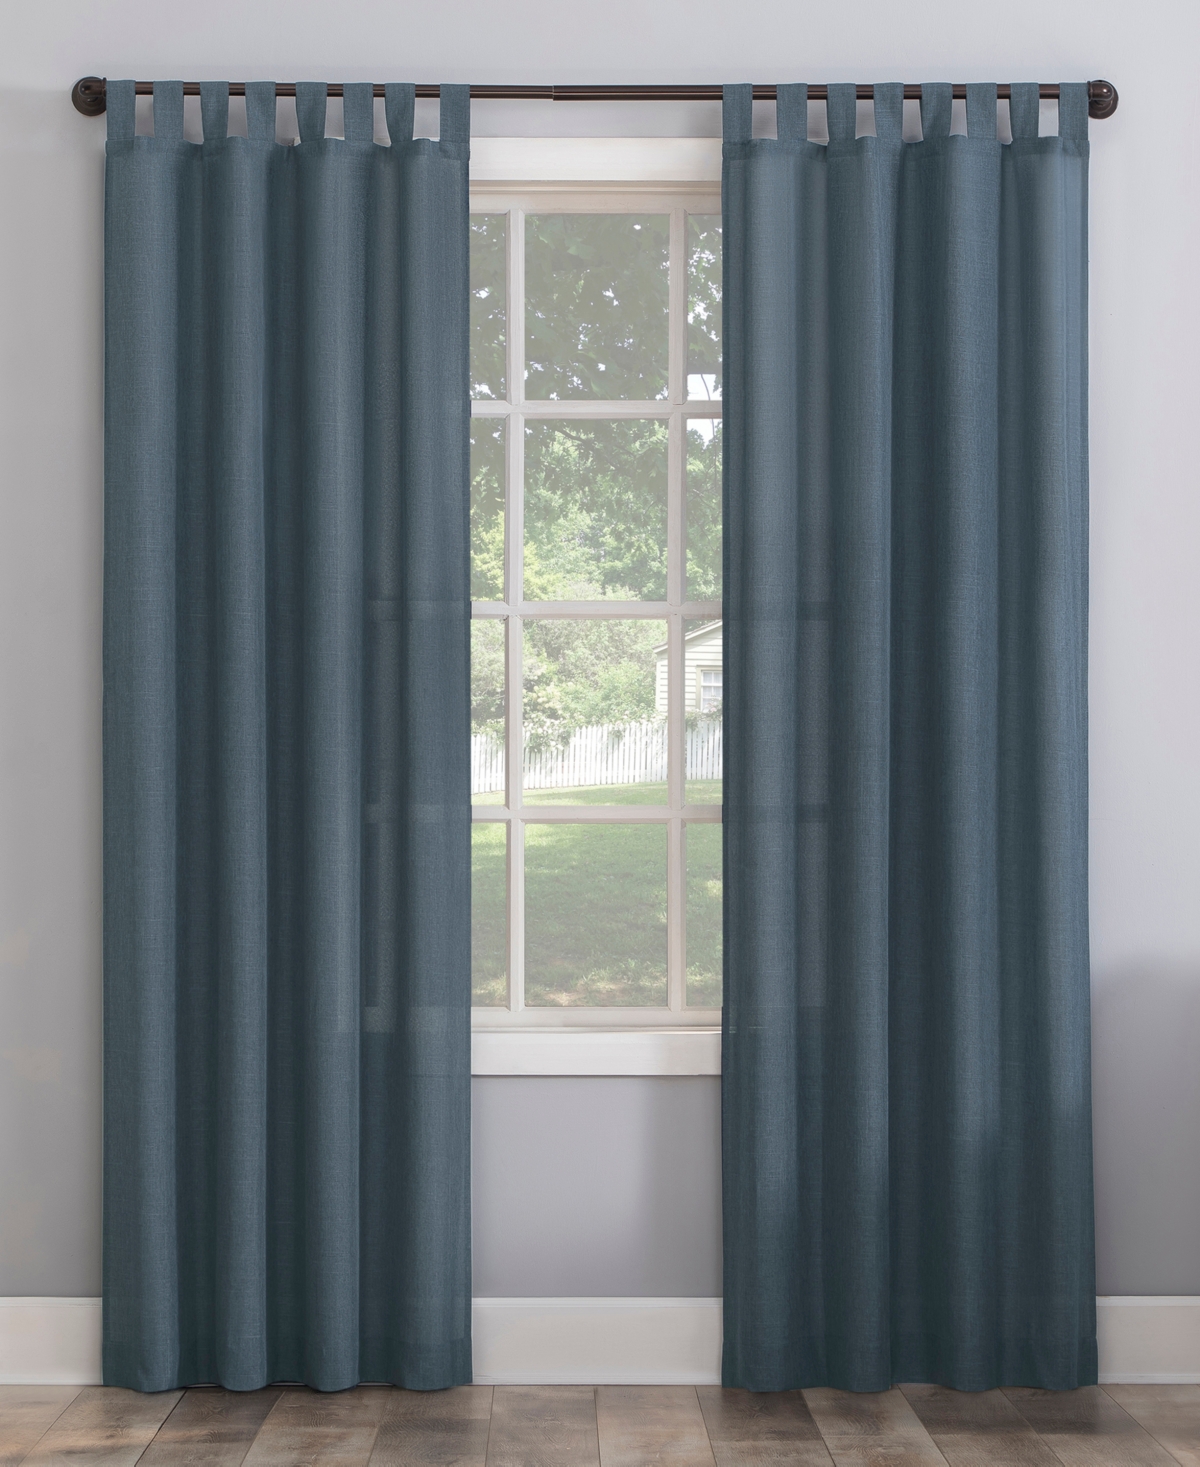 No. 918 Clifford 40" X 84" Tab Top Curtain Panel In Vintage-like Blue